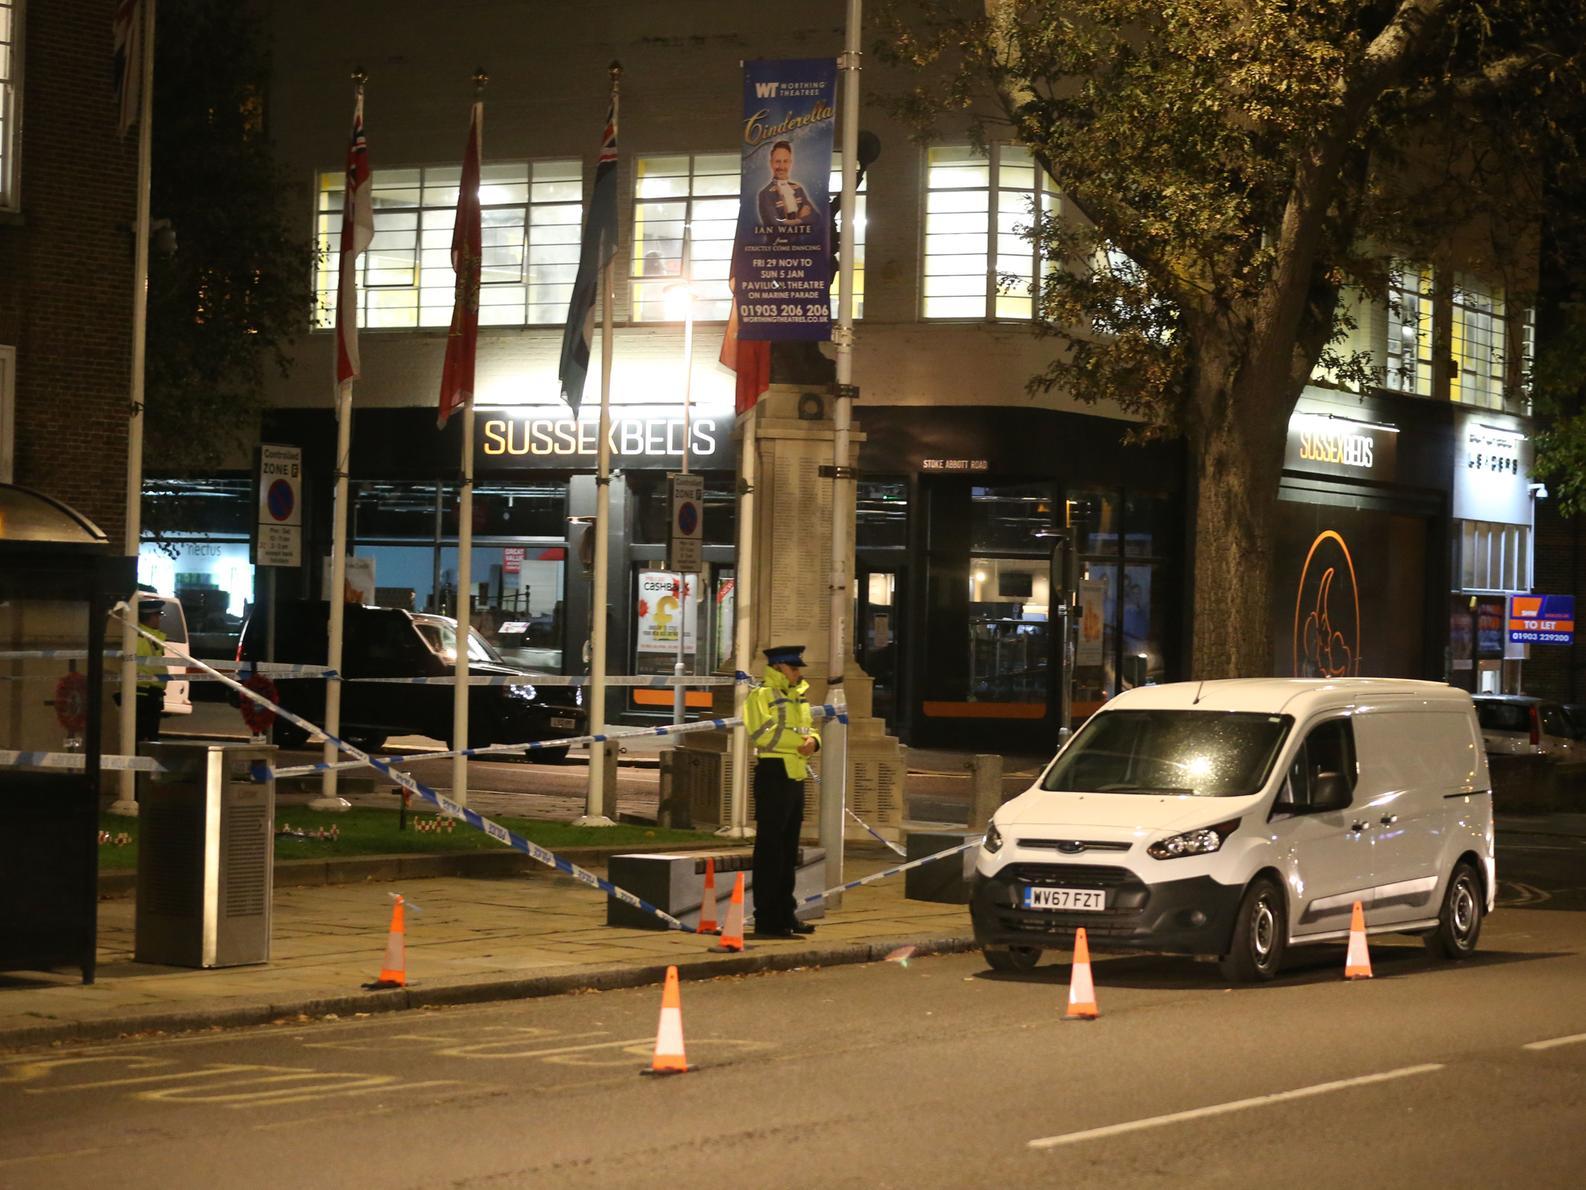 The scene of the incident outside Worthing Town Hall